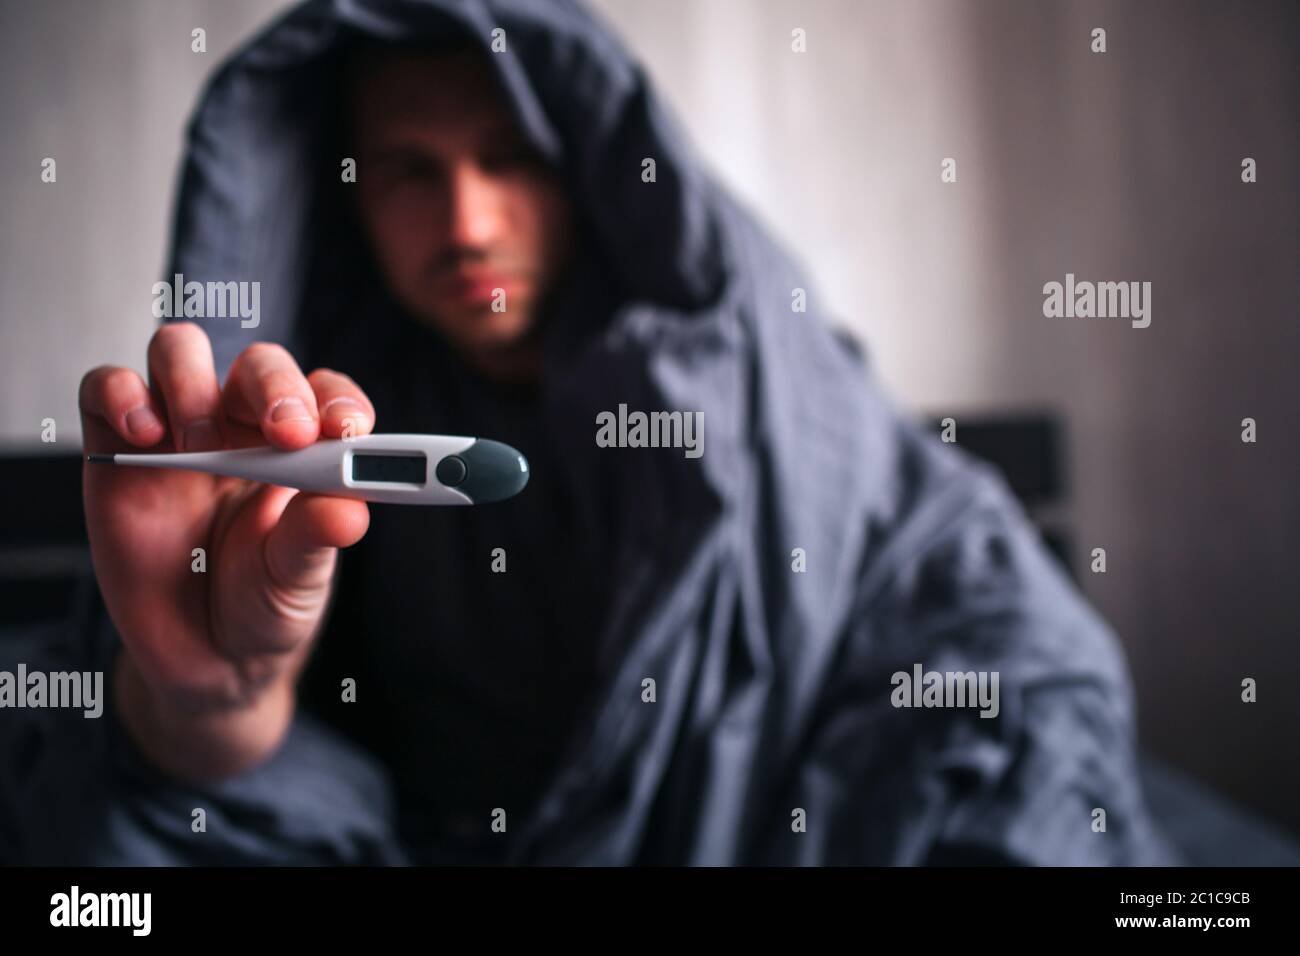 Shows in the camera an electronic meter for measuring body temperature. Stock Photo